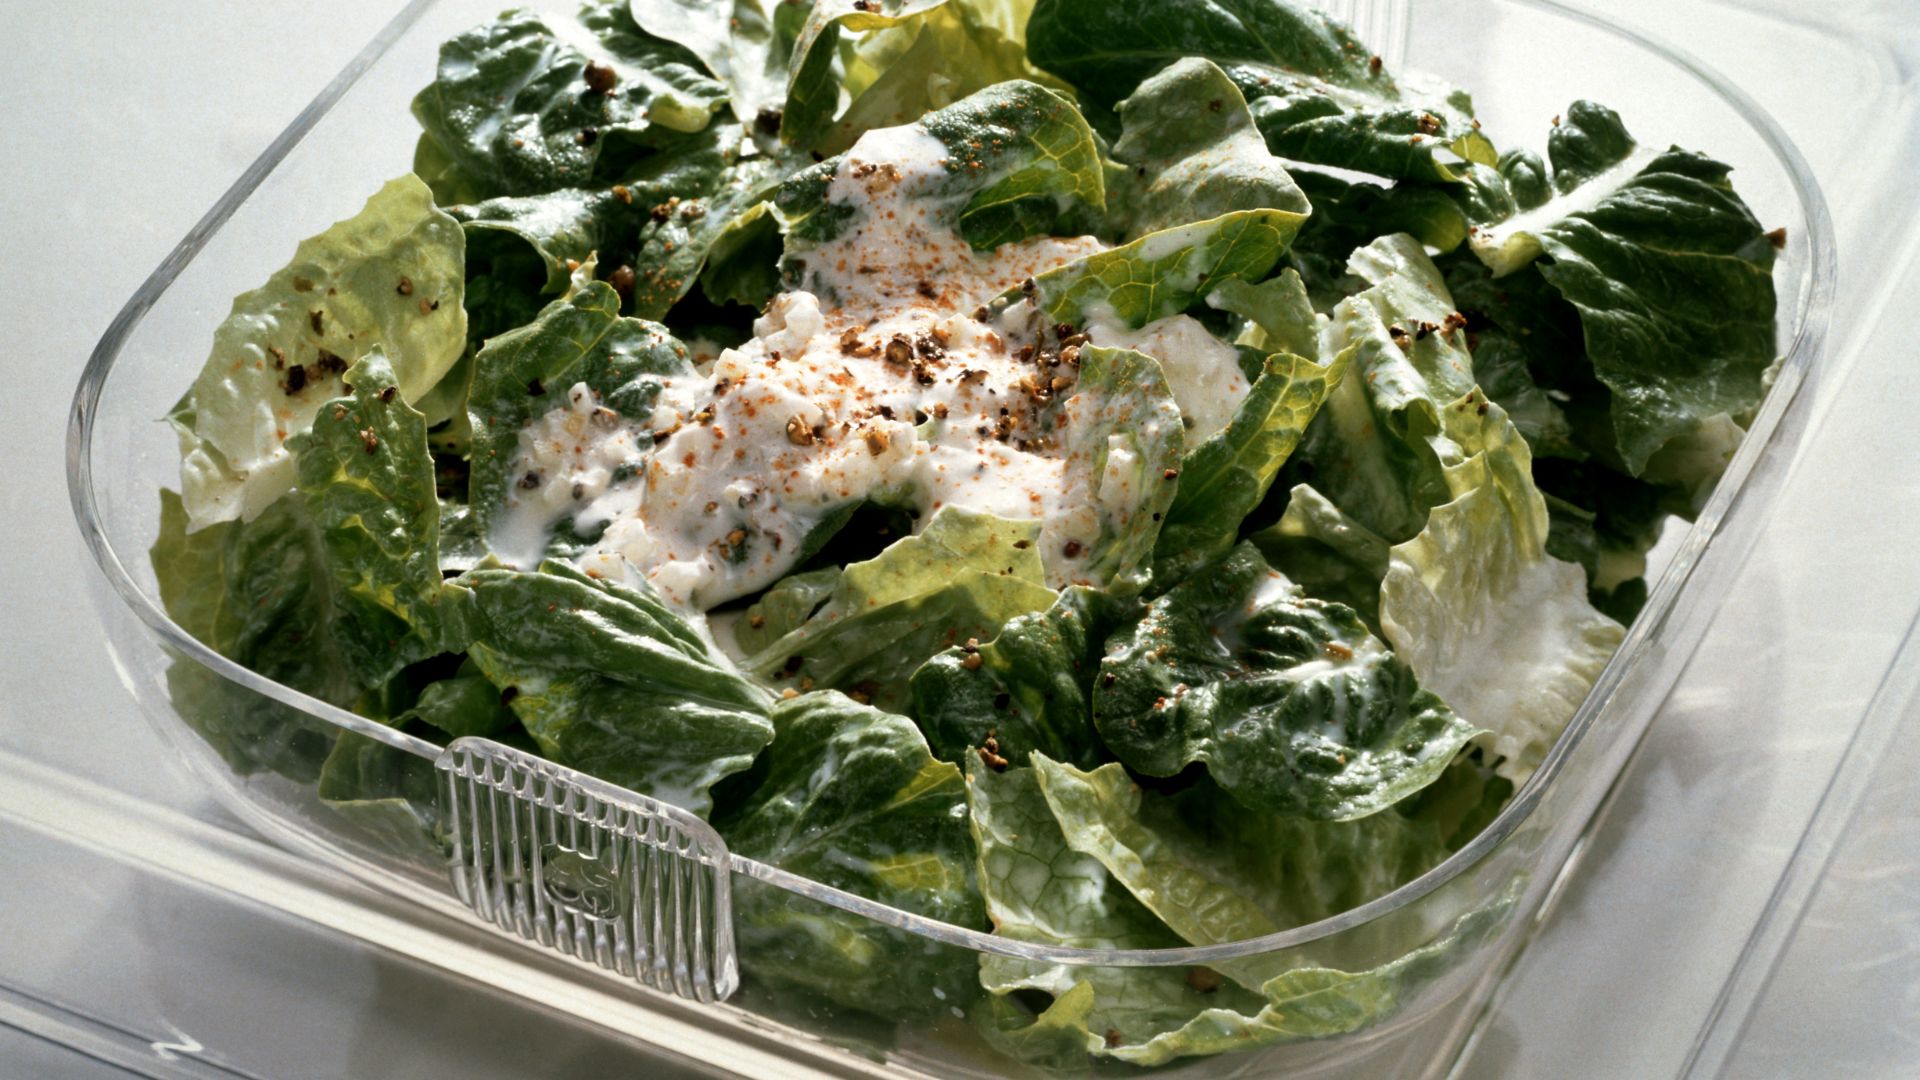 dr g's caesar salad from thrive medical, New Mexico